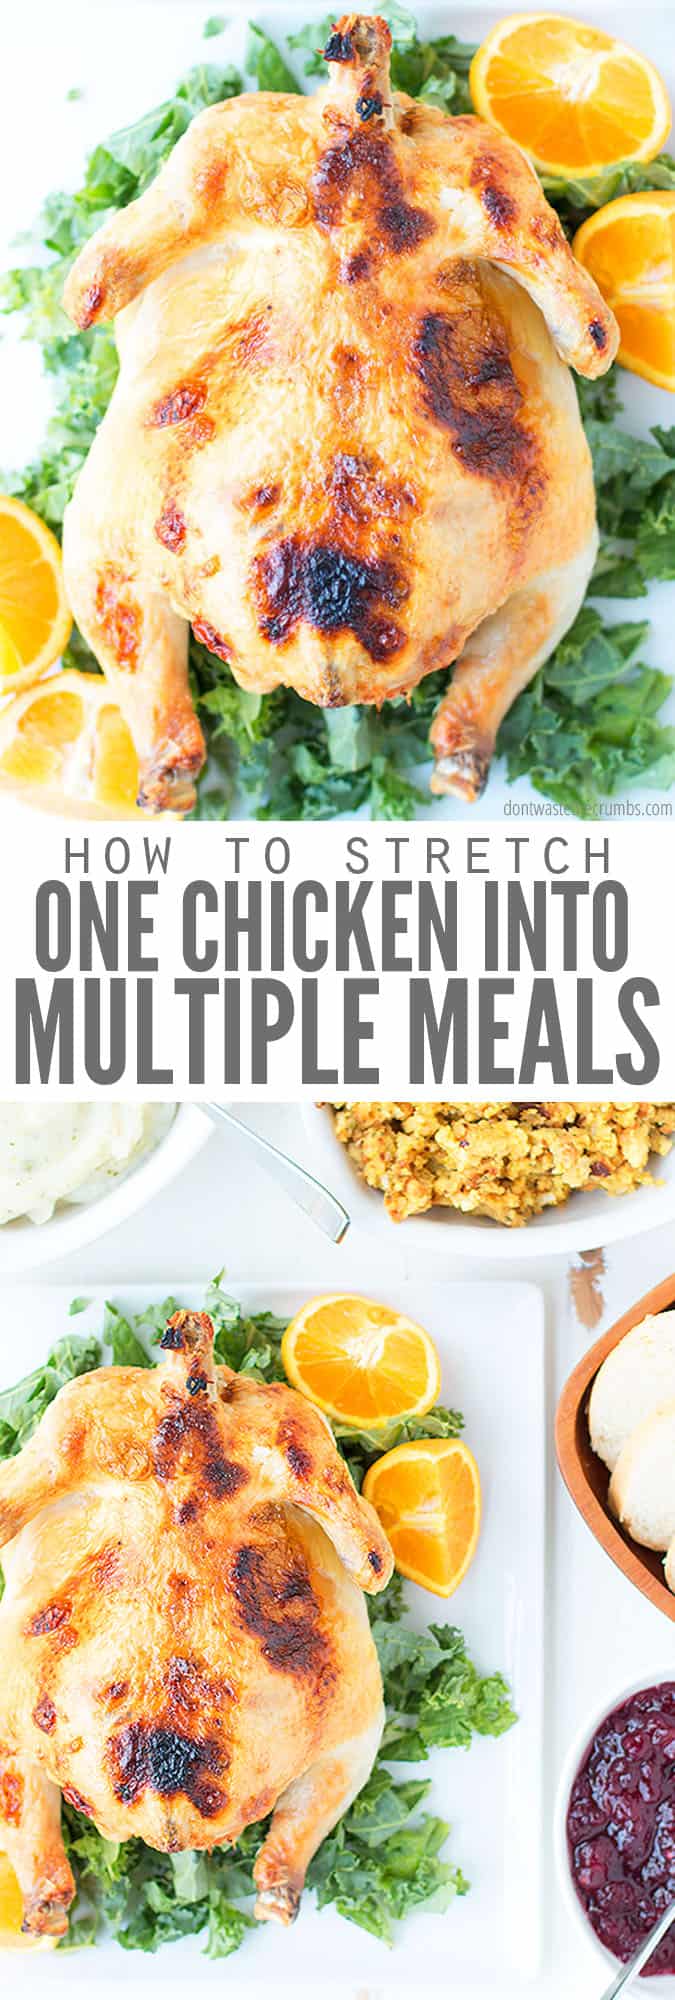 How to Stretch One Chicken into Multiple Meals